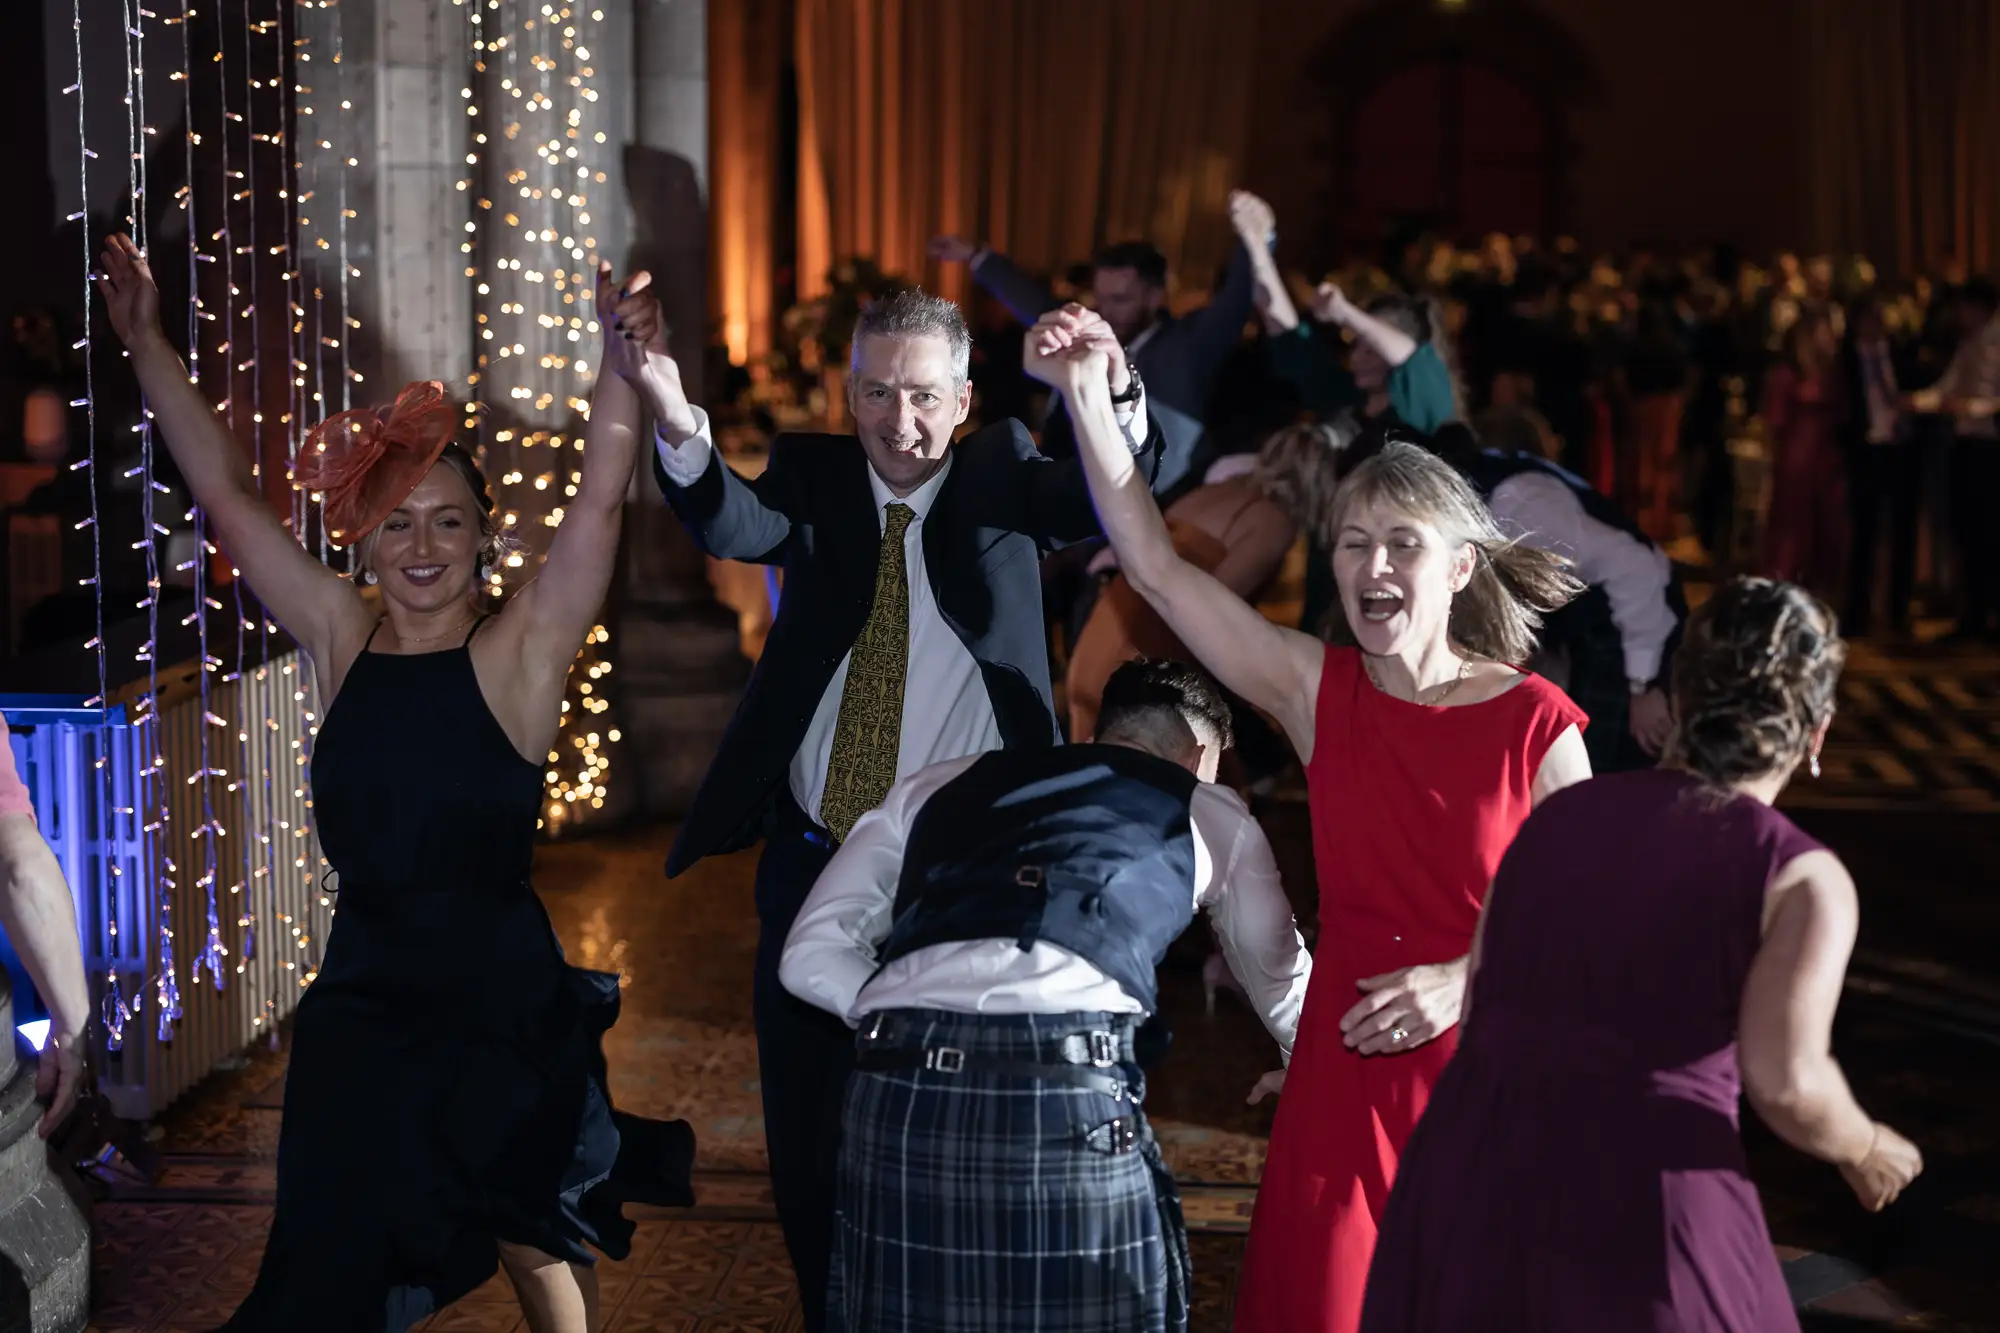 Guests happily dancing at a formal event, with lights hanging in the background and one man in a kilt leading a cheerful dance.